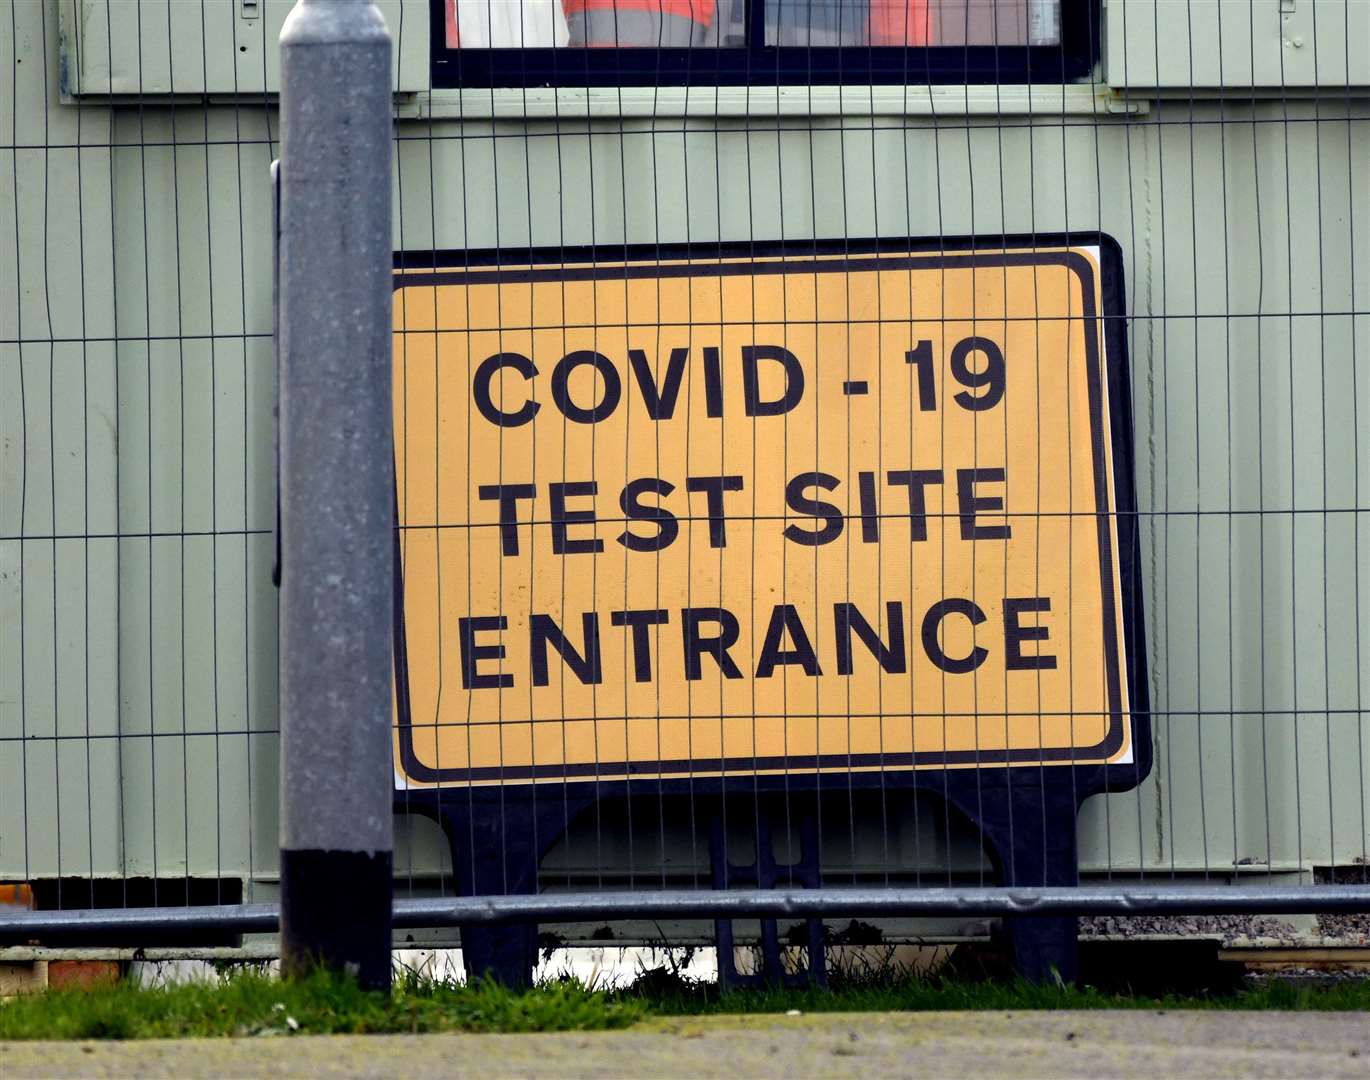 The Covid testing site in Folkestone will be for people who can walk to it